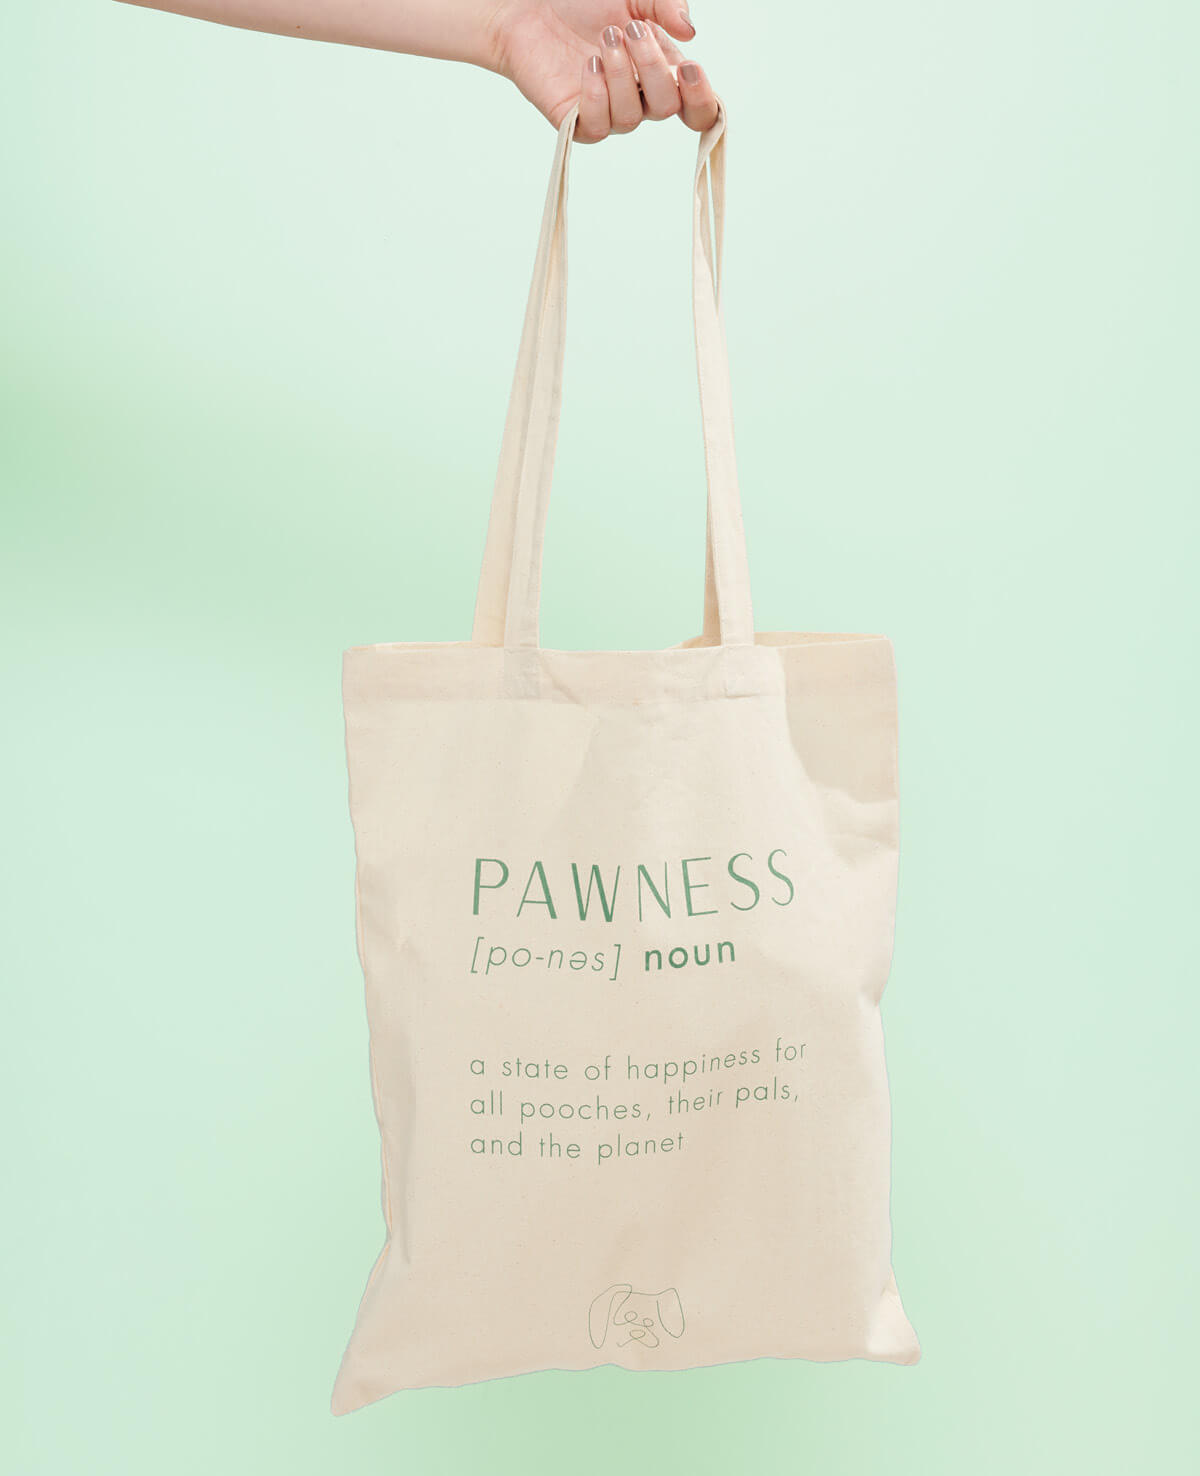 A stylish tote bag with a paw print design, perfect for pet lovers.